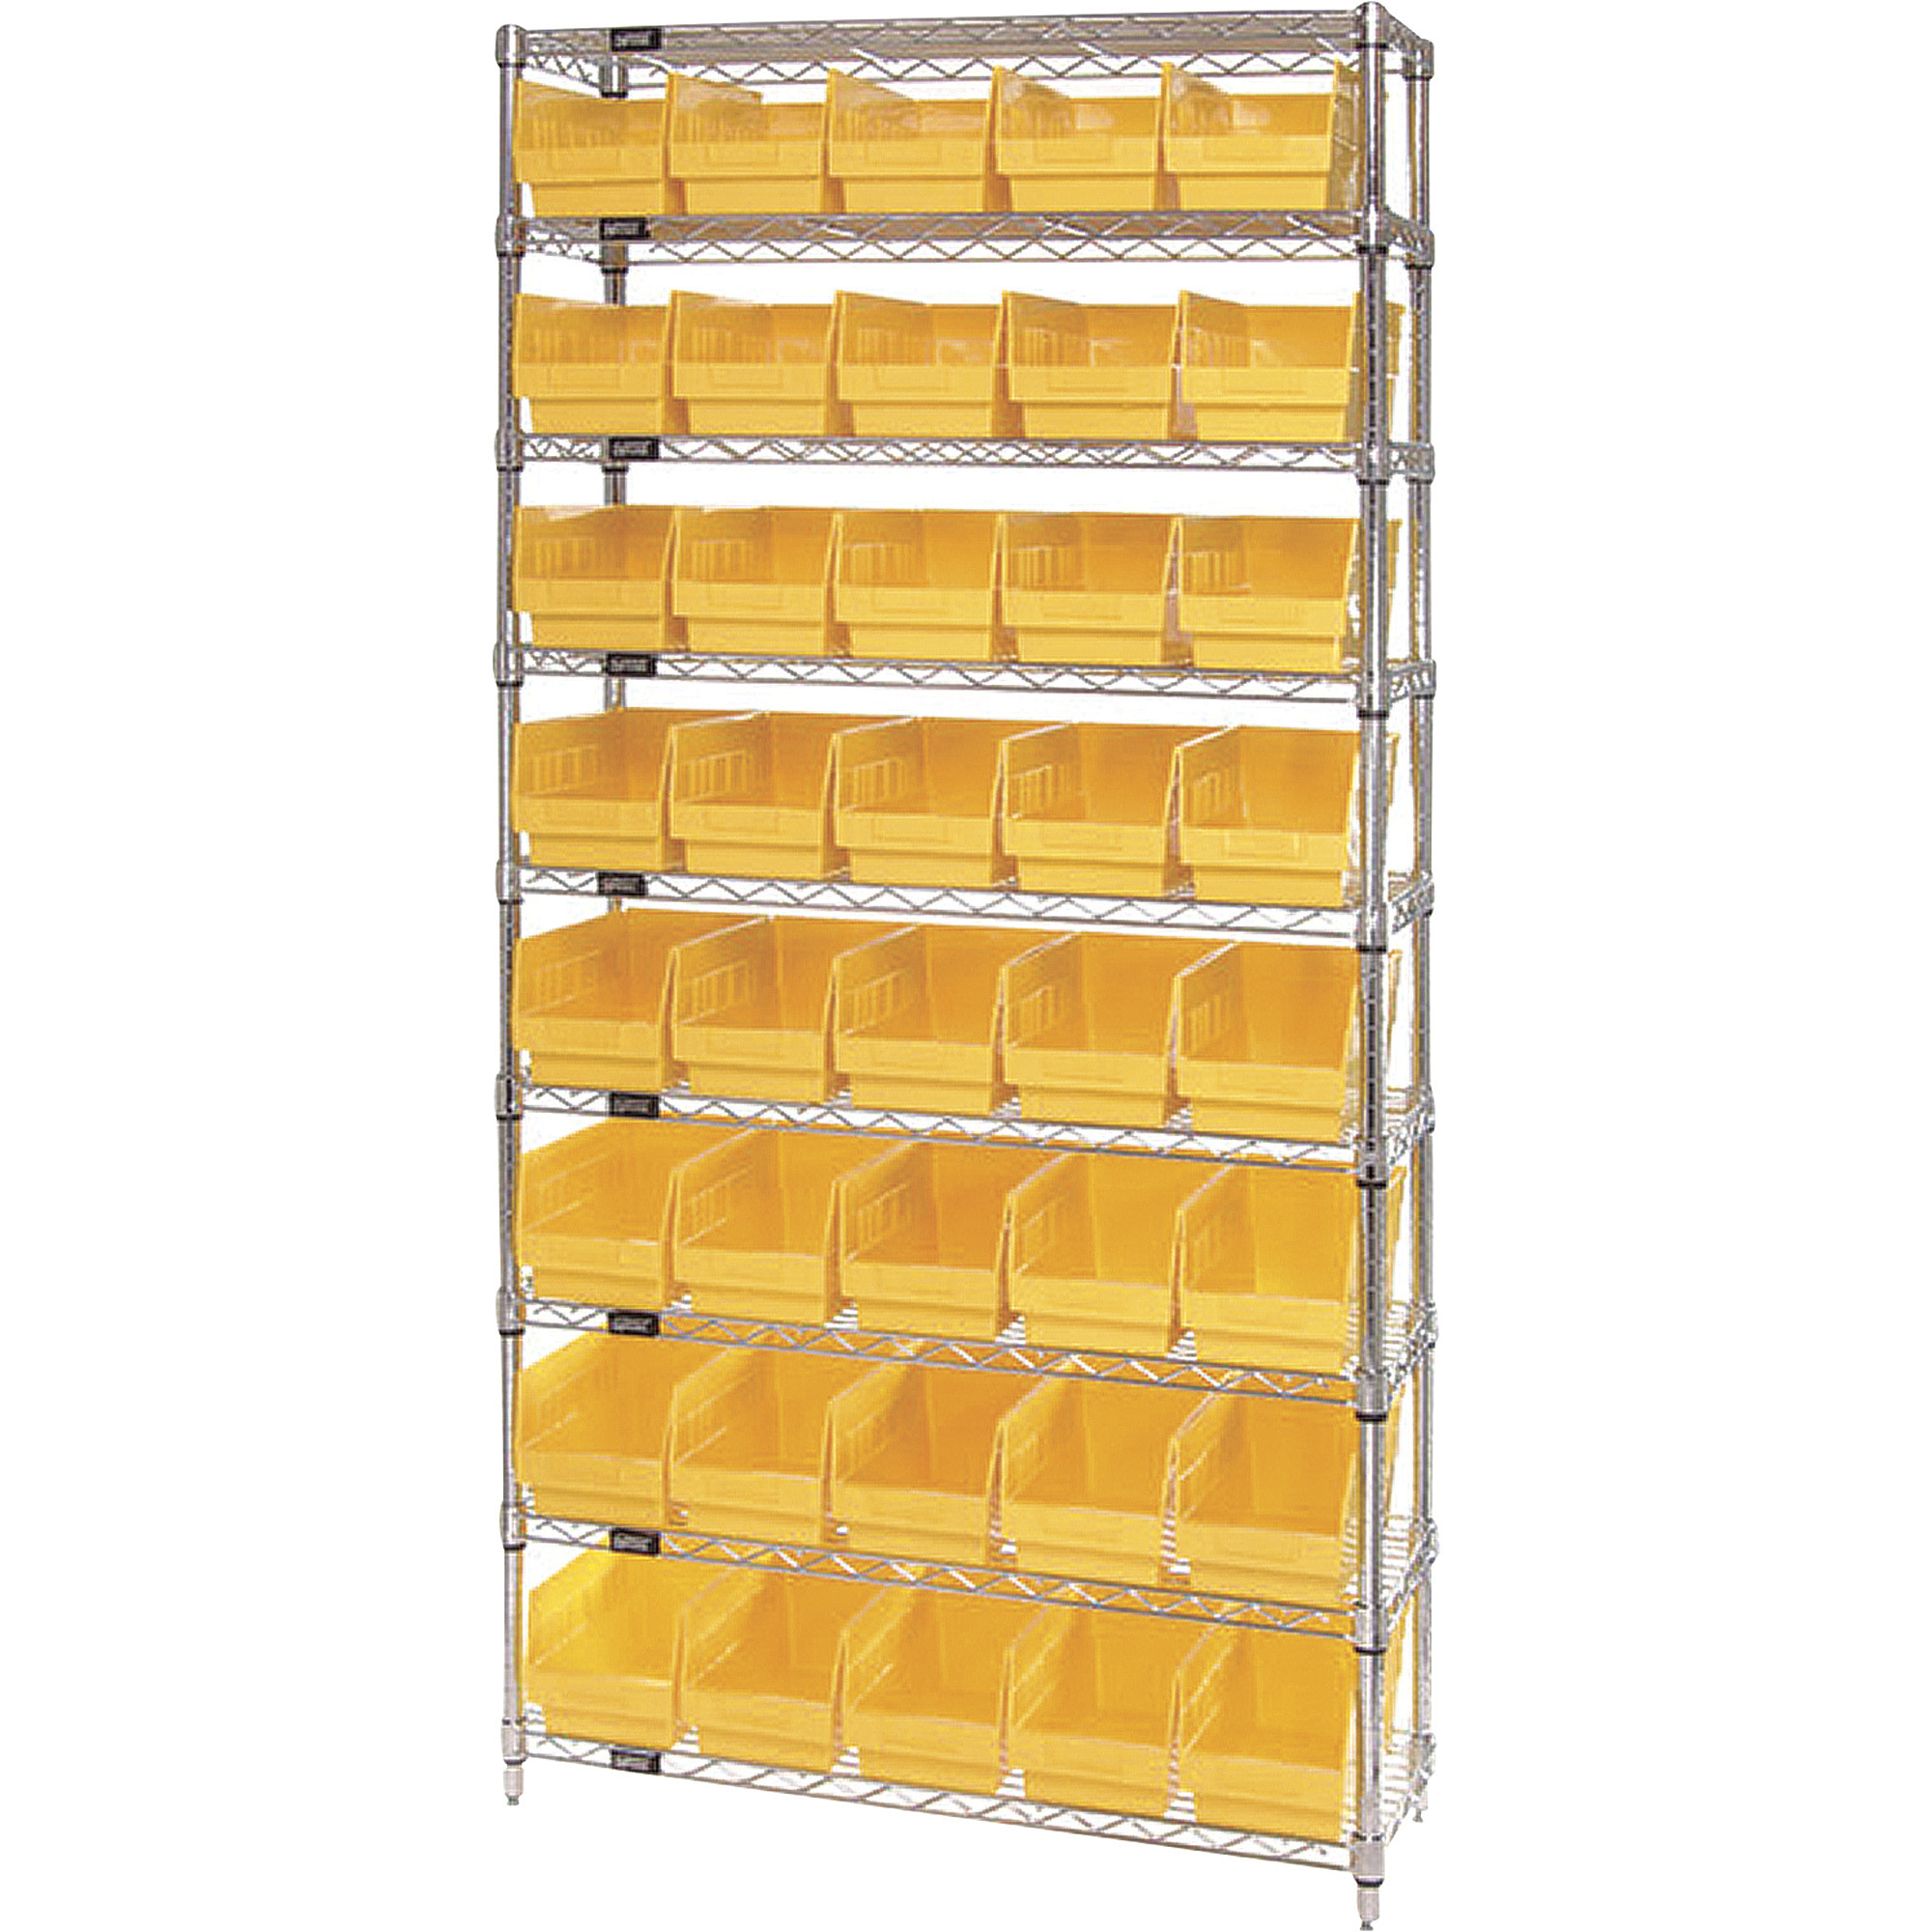 Storage Single Side Wire Chrome Shelving Unit with 40 Bins — 36Inch W x 12Inch D x 74Inch H, Yellow, Model - Quantum WR9-202YL